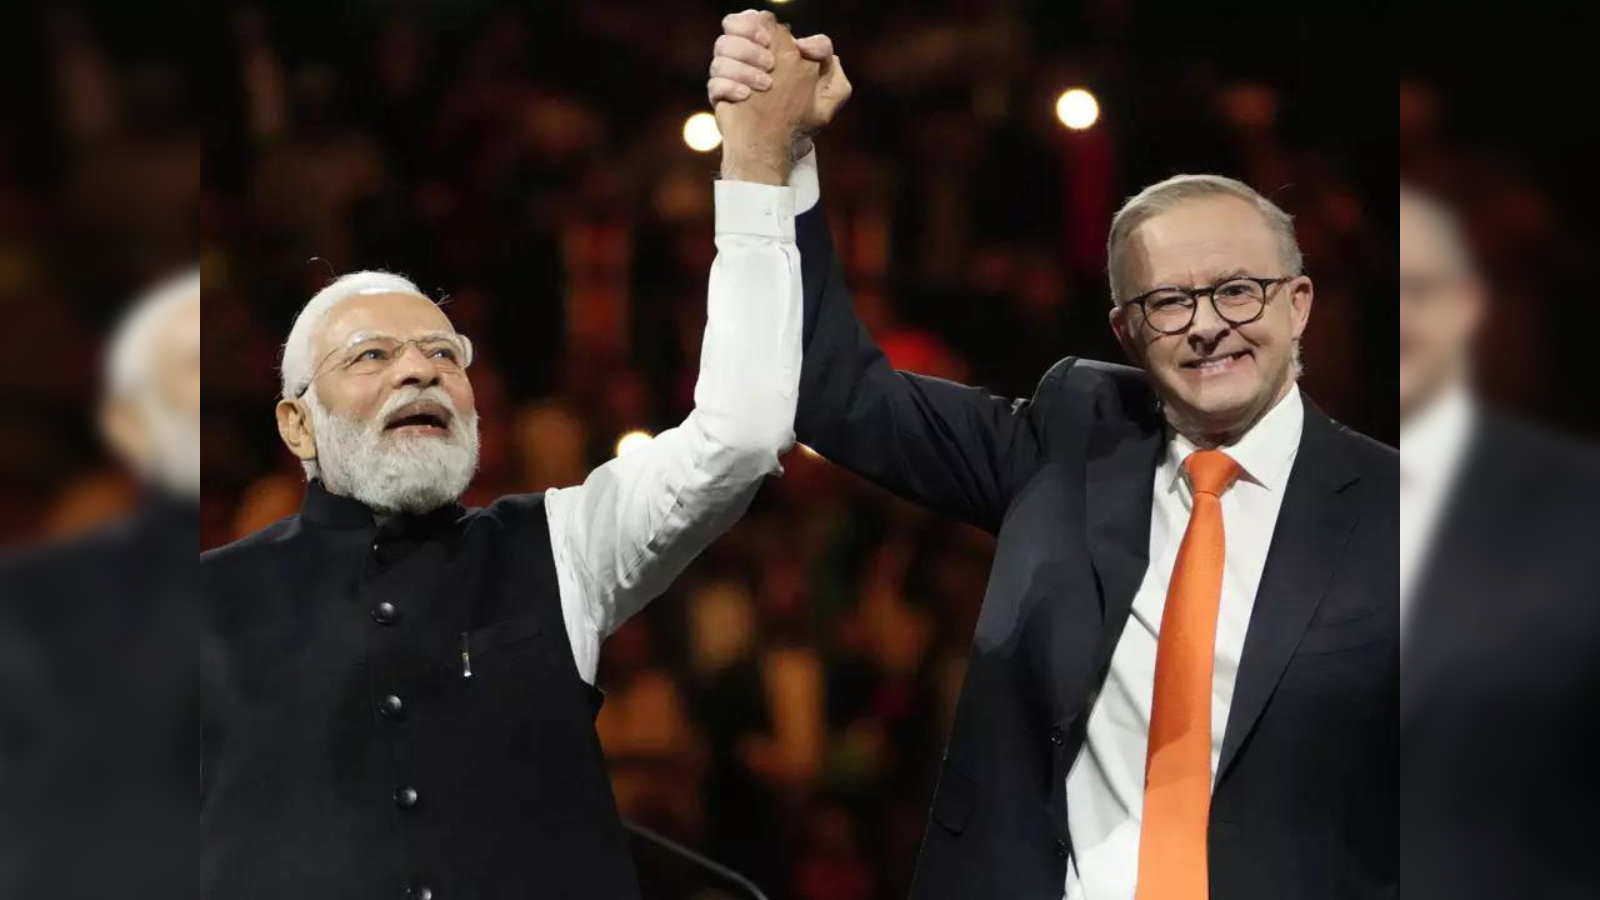 Australian PM Anthony Albanese to visit India to participate in G20 Summit - The